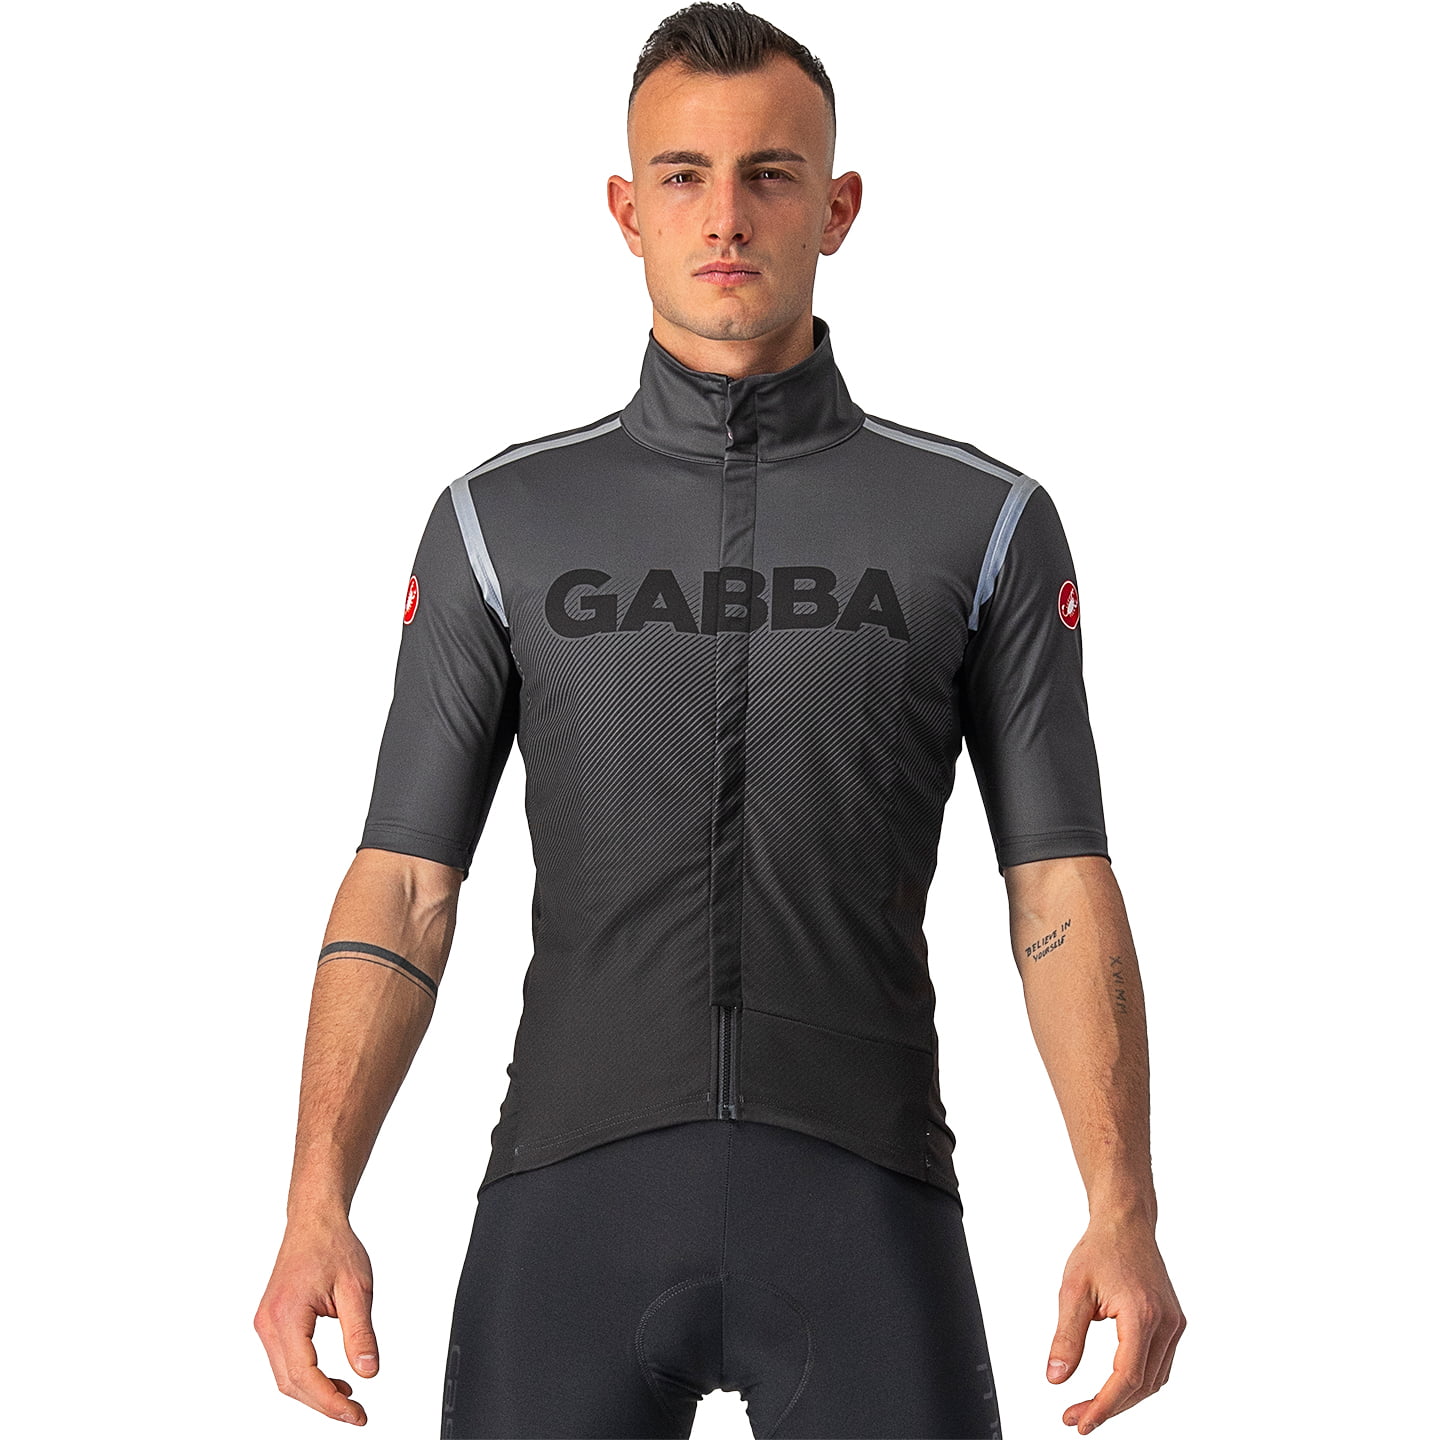 CASTELLI Gabba RoS Special Edition Short Sleeve Light Jacket Light Jacket, for men, size 2XL, Cycle jacket, Cycling clothing